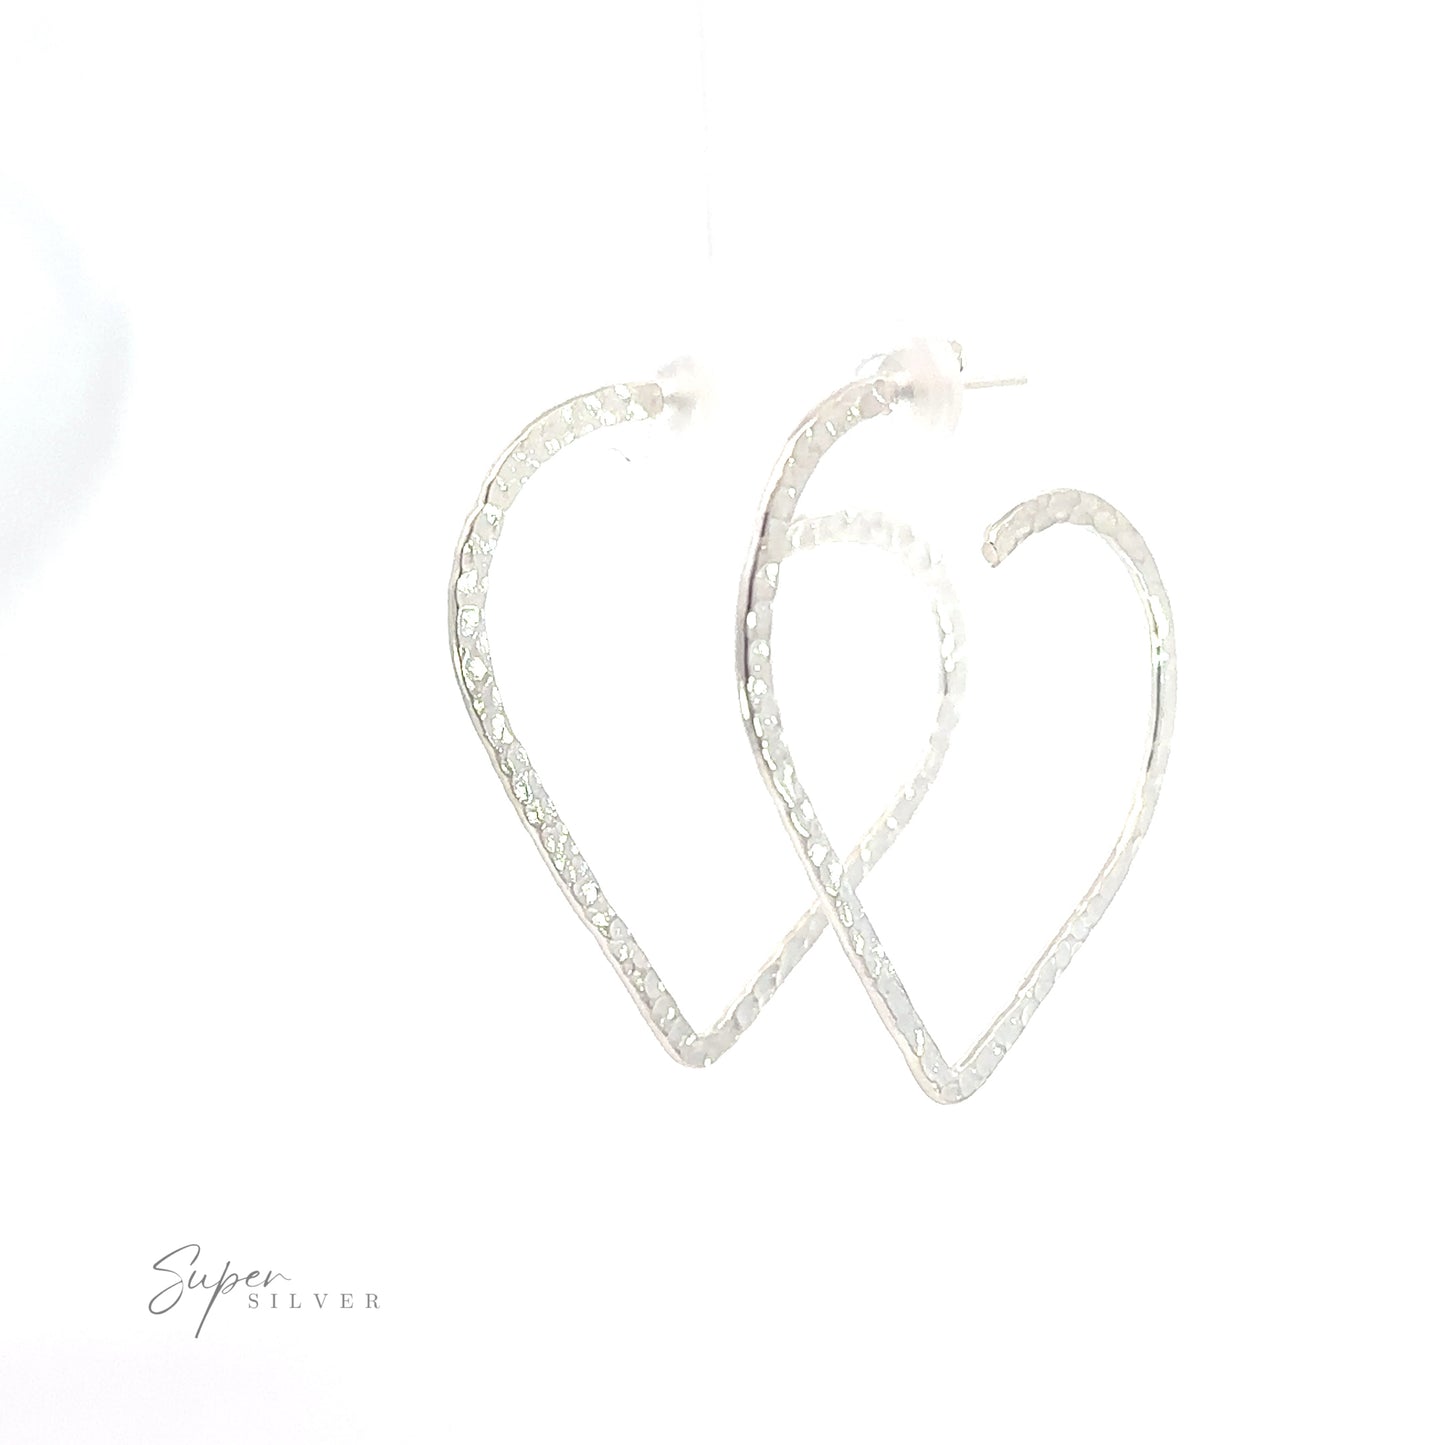 A pair of Textured Heart Hoop Earrings on a white background, measuring 1.75 inches long in .925 Sterling Silver.